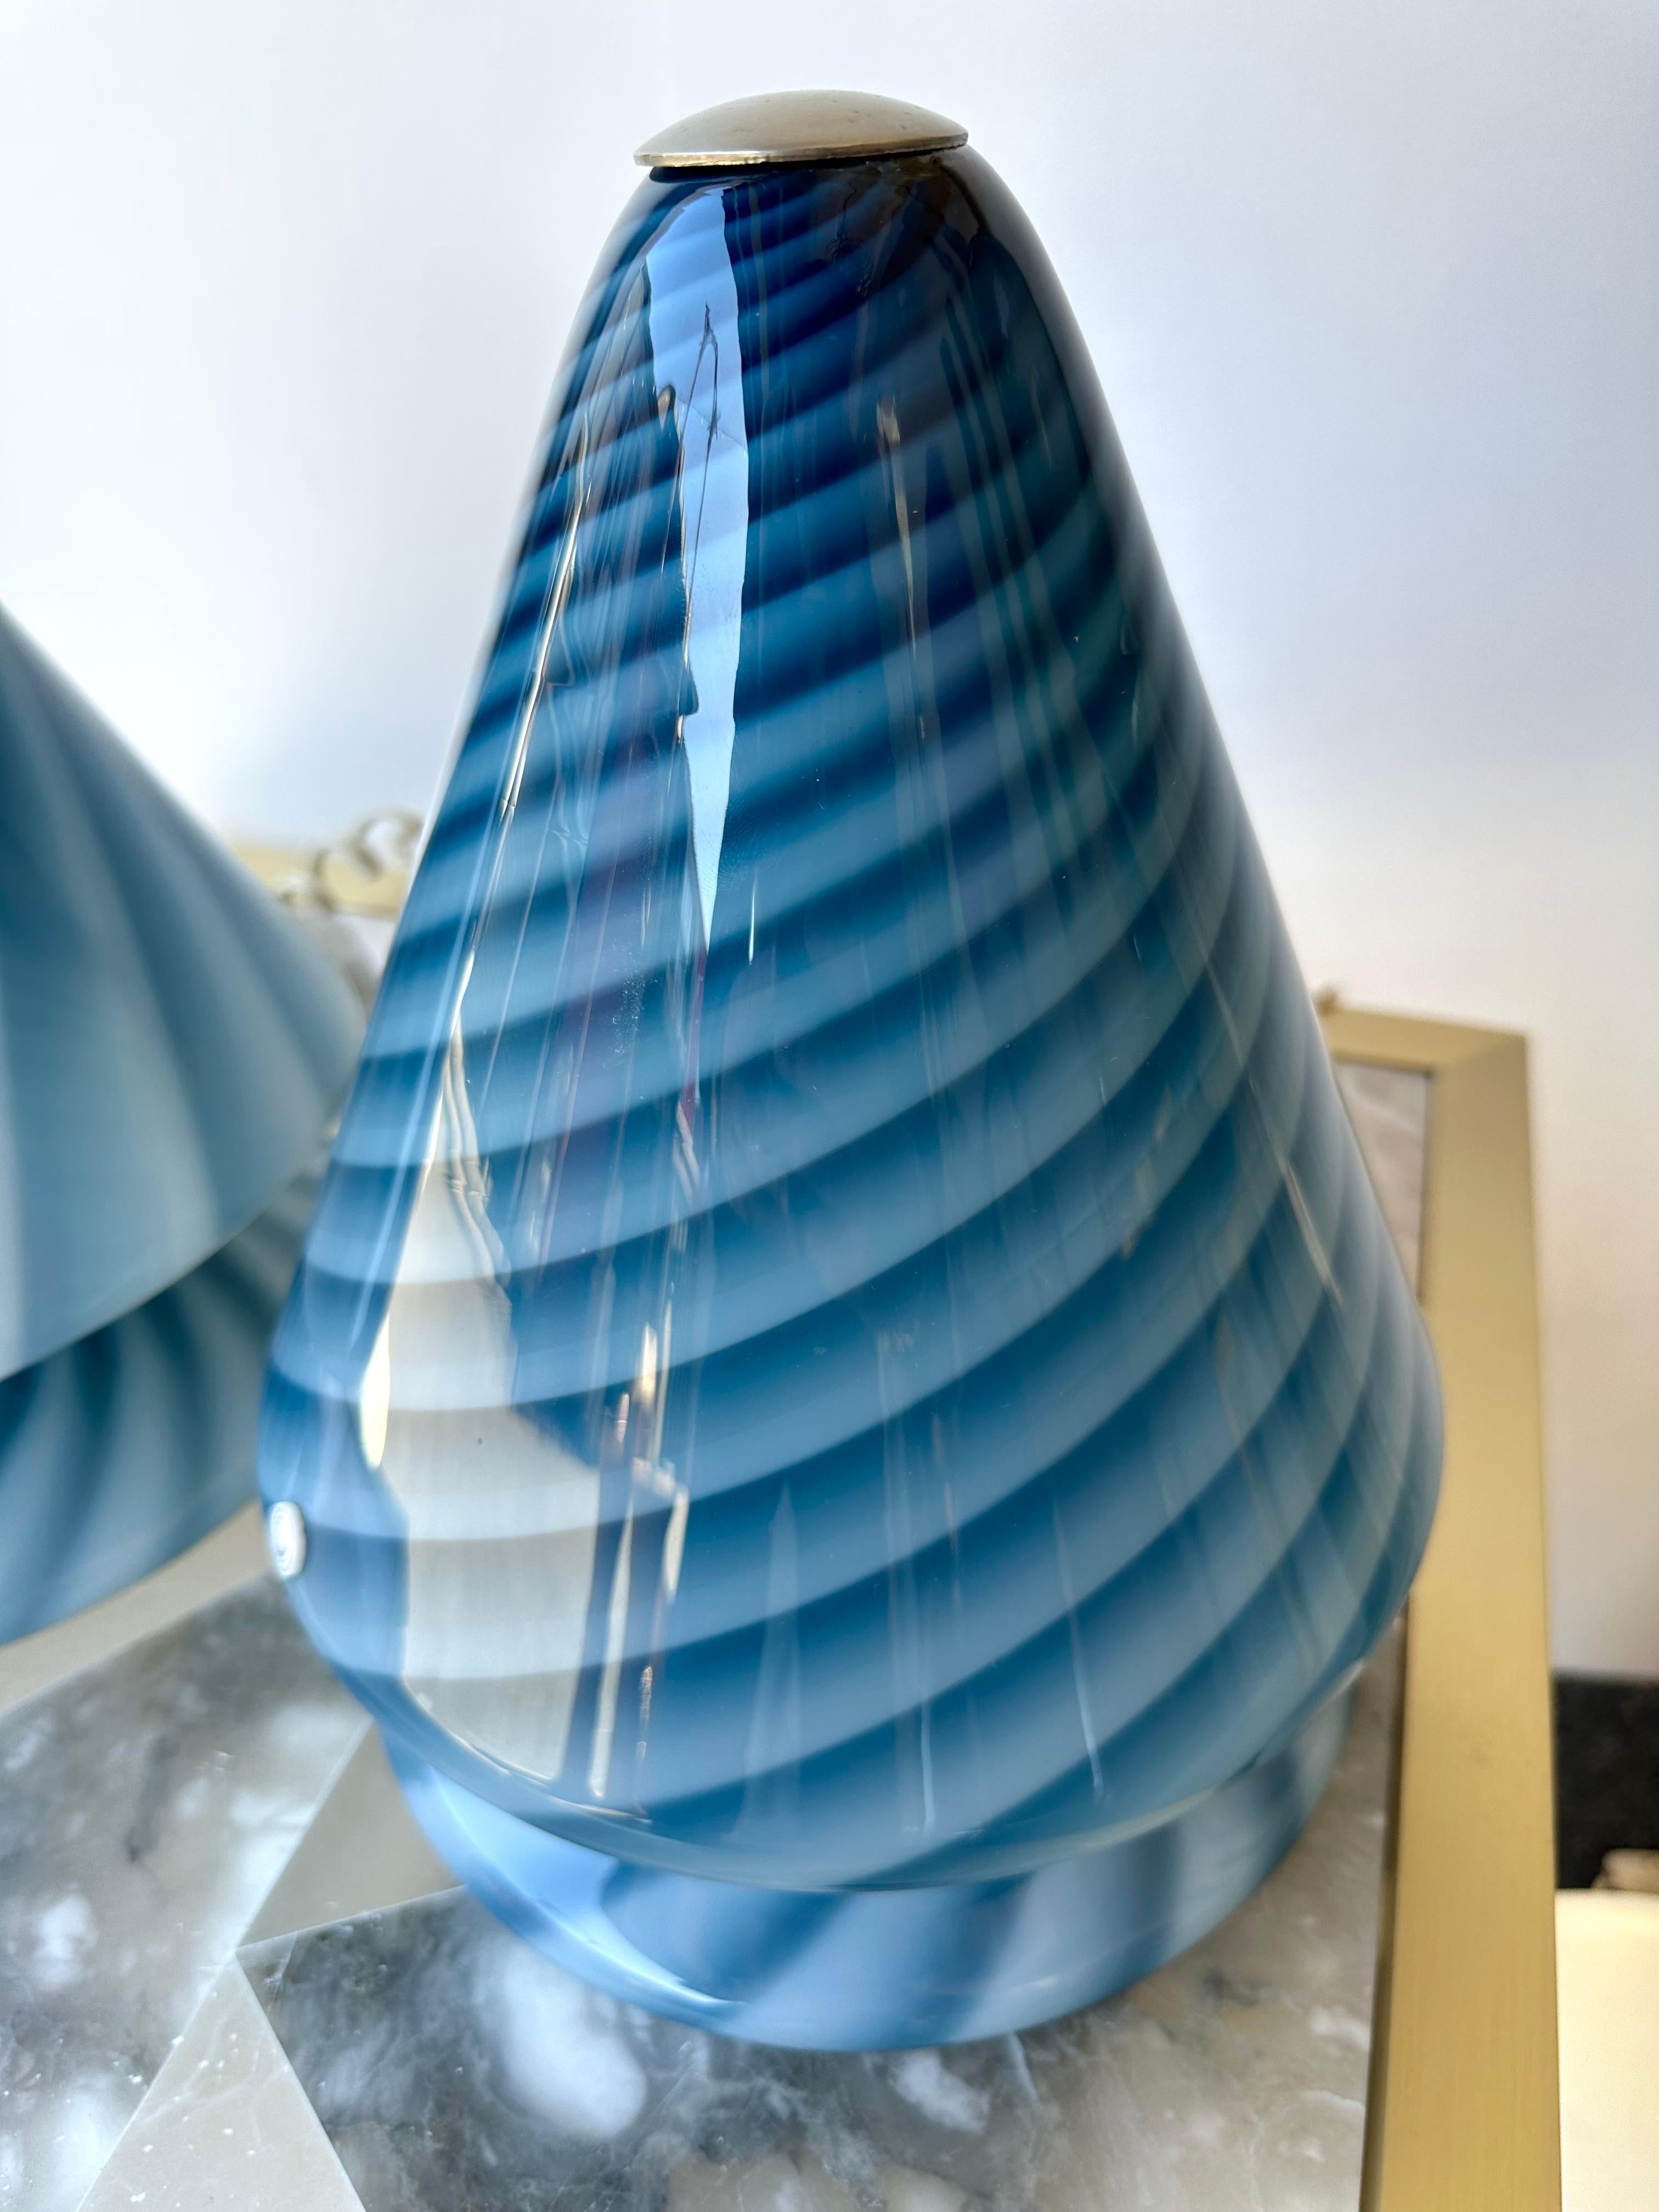 Pair of Blue Spiral Murano Glass Lamps by La Murrina, Italy, 1970s For Sale 4